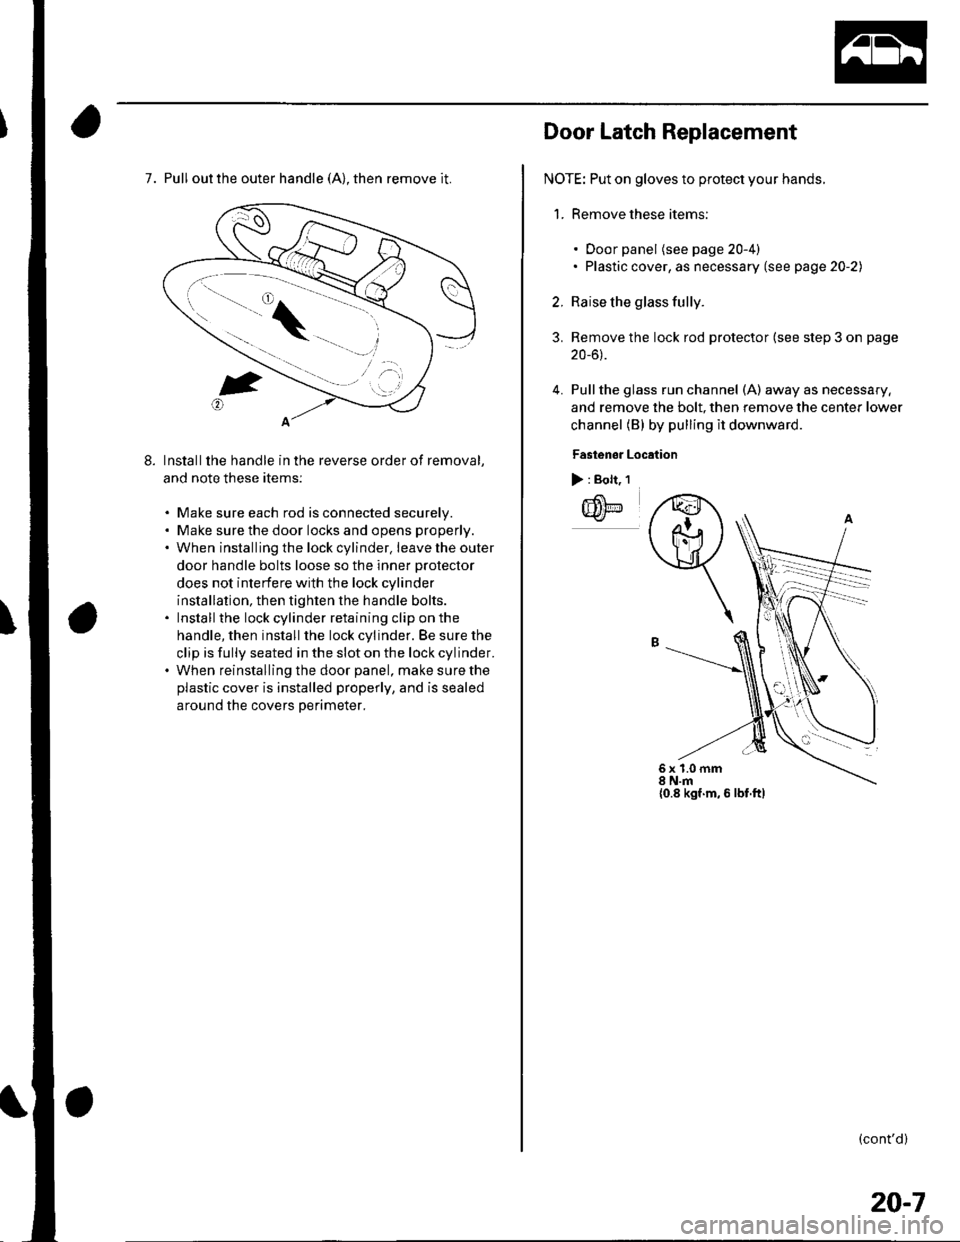 HONDA CIVIC 2003 7.G User Guide 7. Pull out the outer handle (A), then remove it.
Installthe handle in the reverse order of removal,
and note these items:
. Make sure each rod is connected securelv.. Make sure the door locks and ope